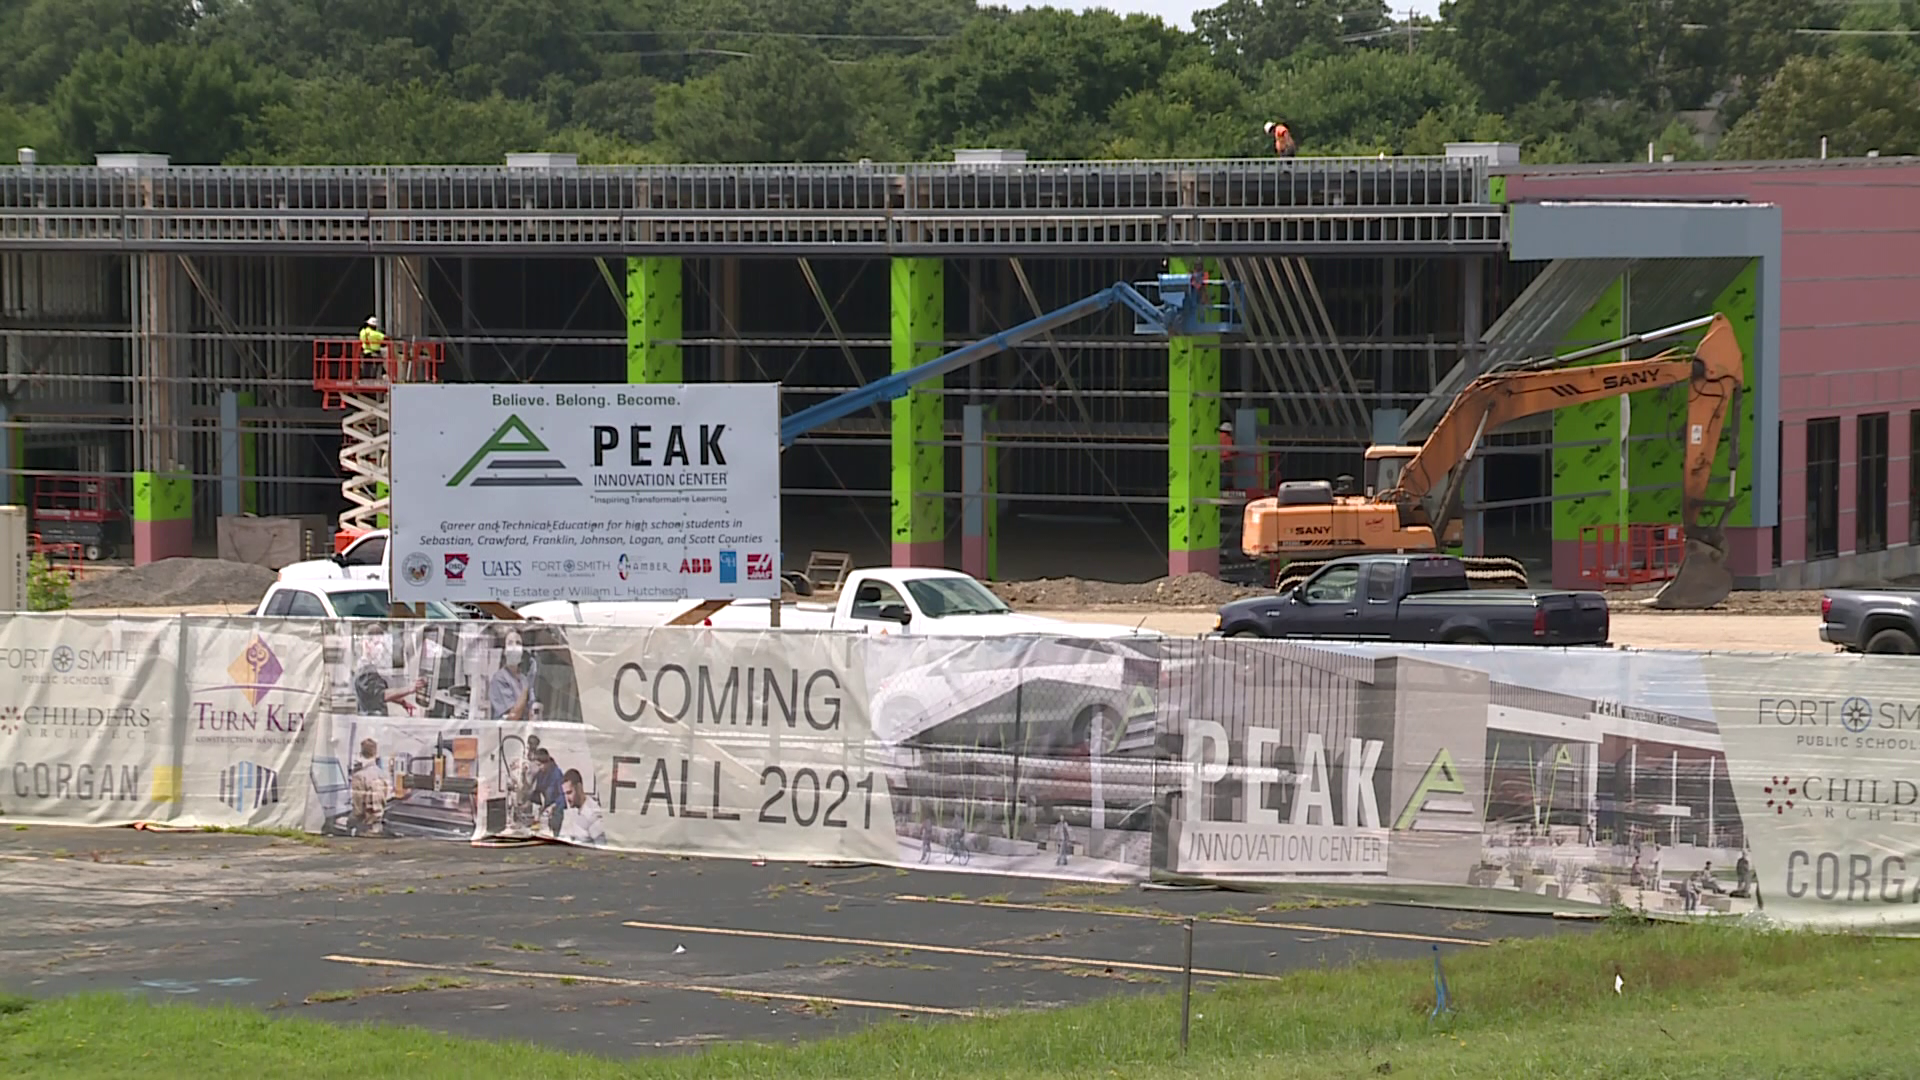 School leaders say the project is coming in about $6 million over budget, but the money is still there to finish it.